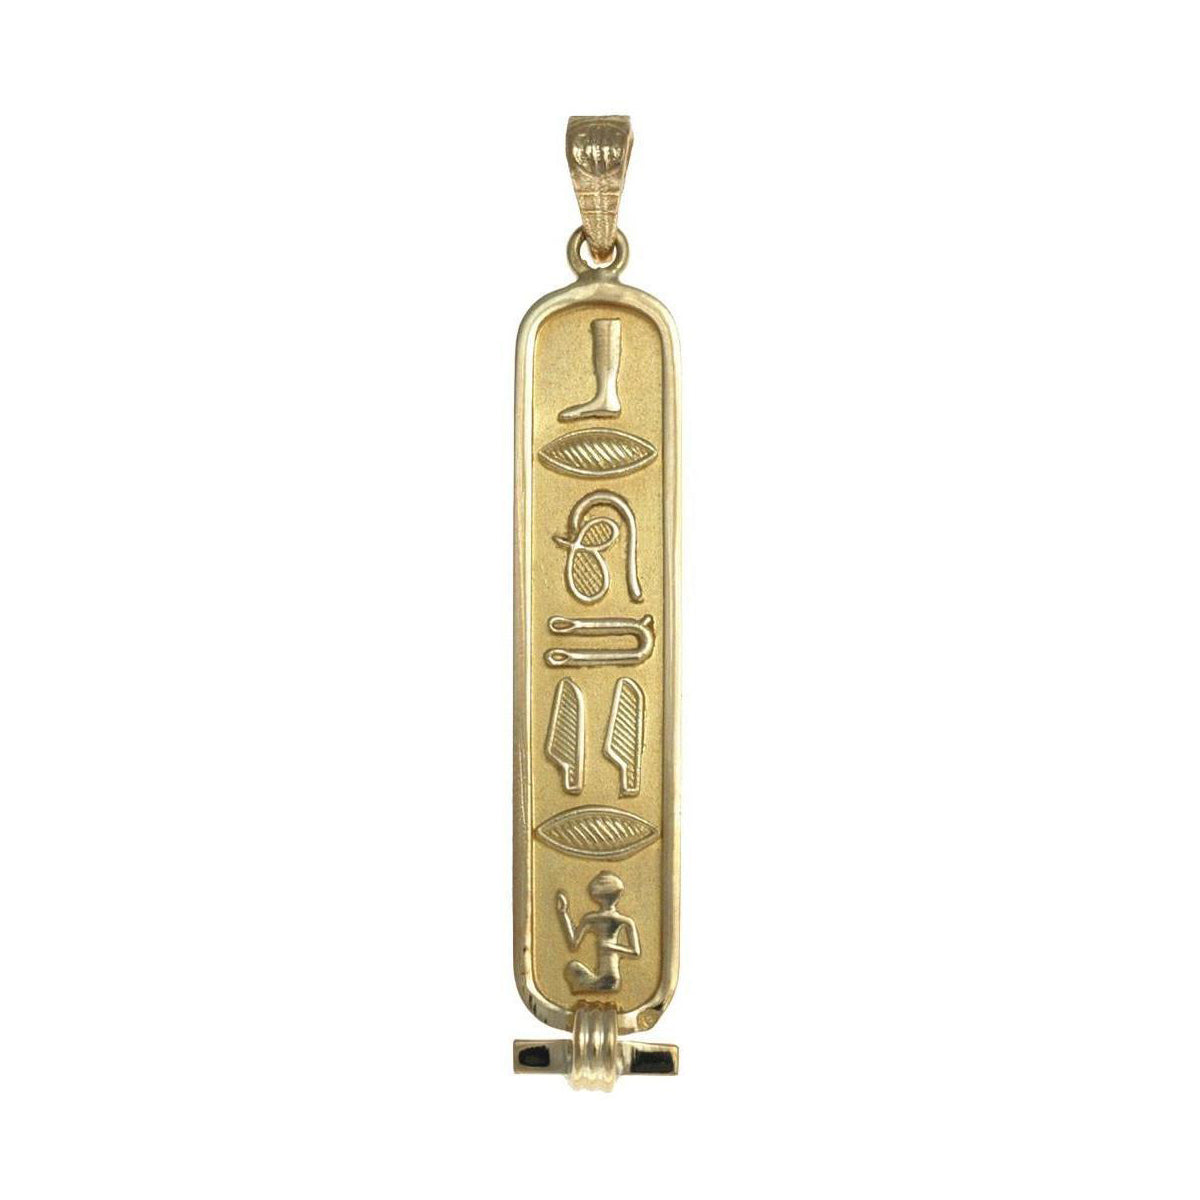 Ancient Egyptian Hieroglyphic Personalised Name Necklace | Name necklace,  Necklace, Custom name necklace